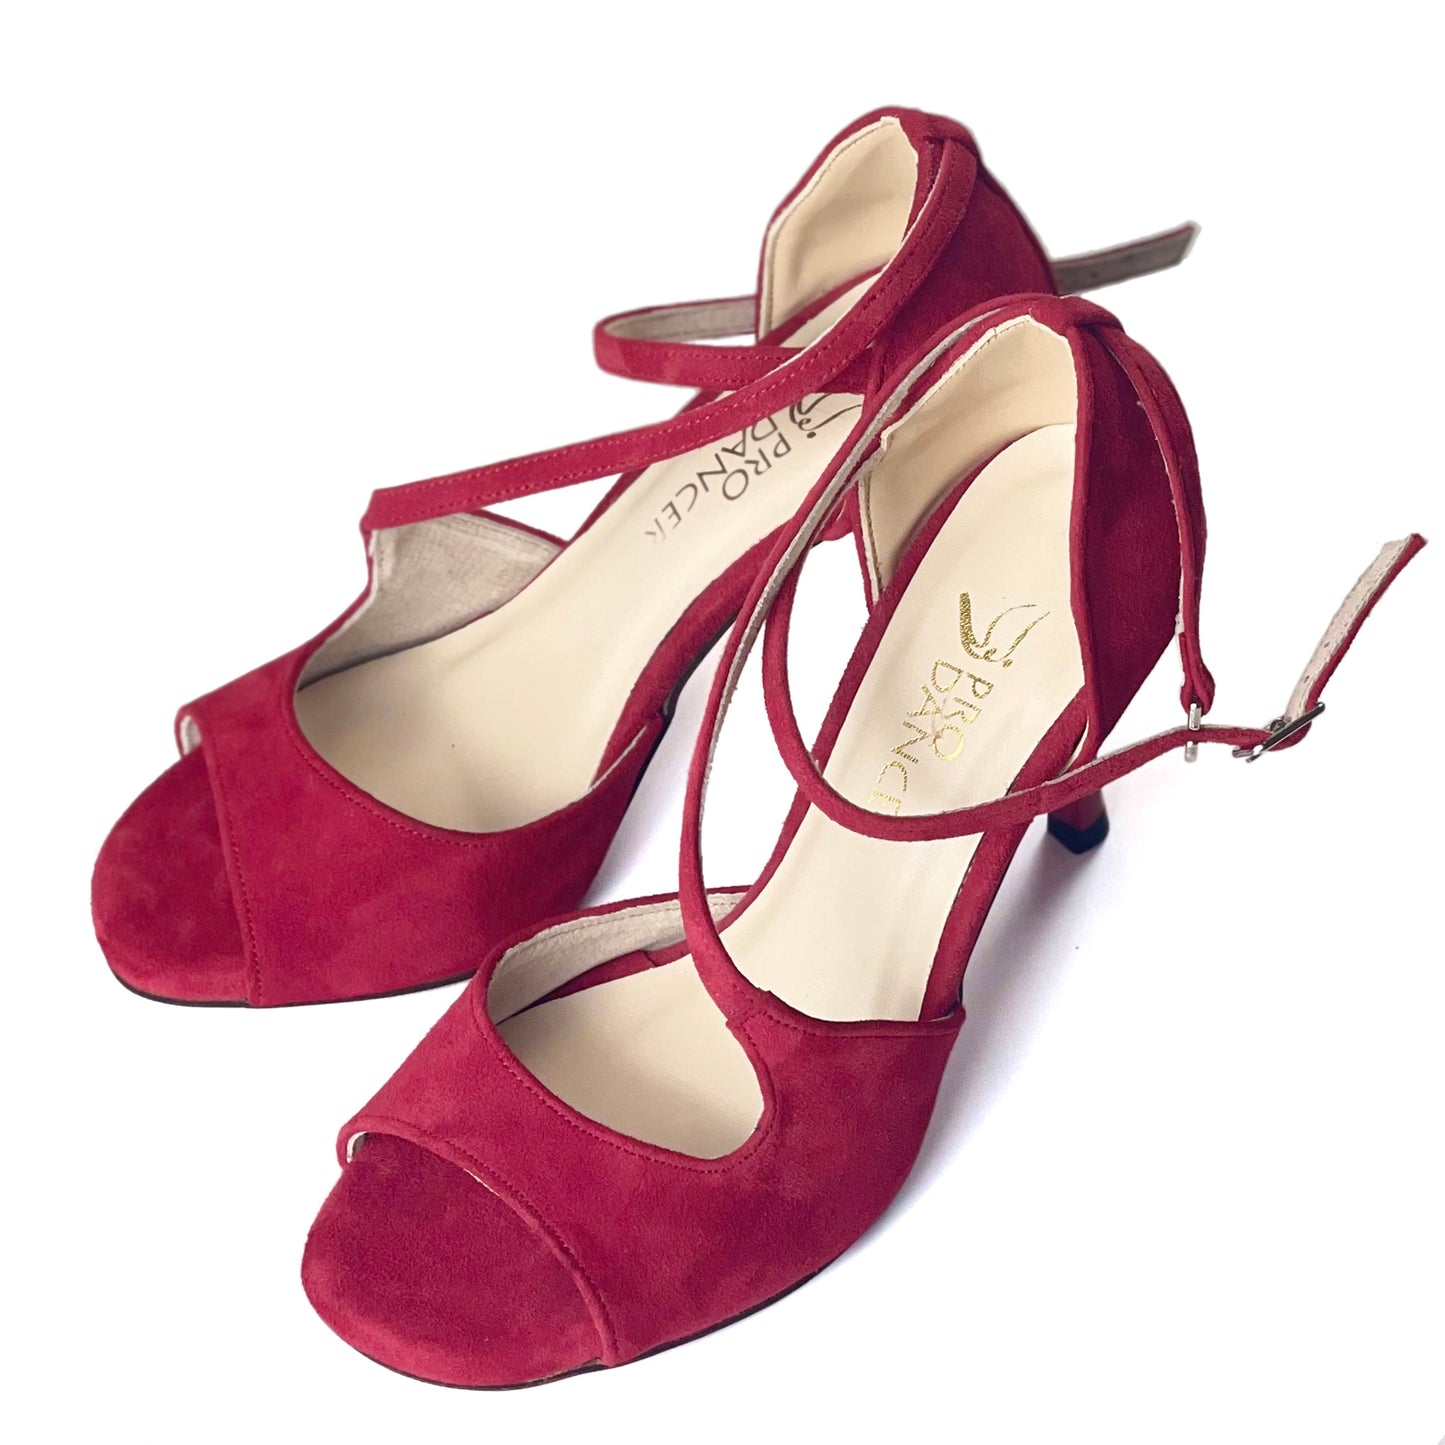 Pro Dancer Tango Argentino Shoes High Heel Dance Sandals Leather Sole Red (PD-9063A)